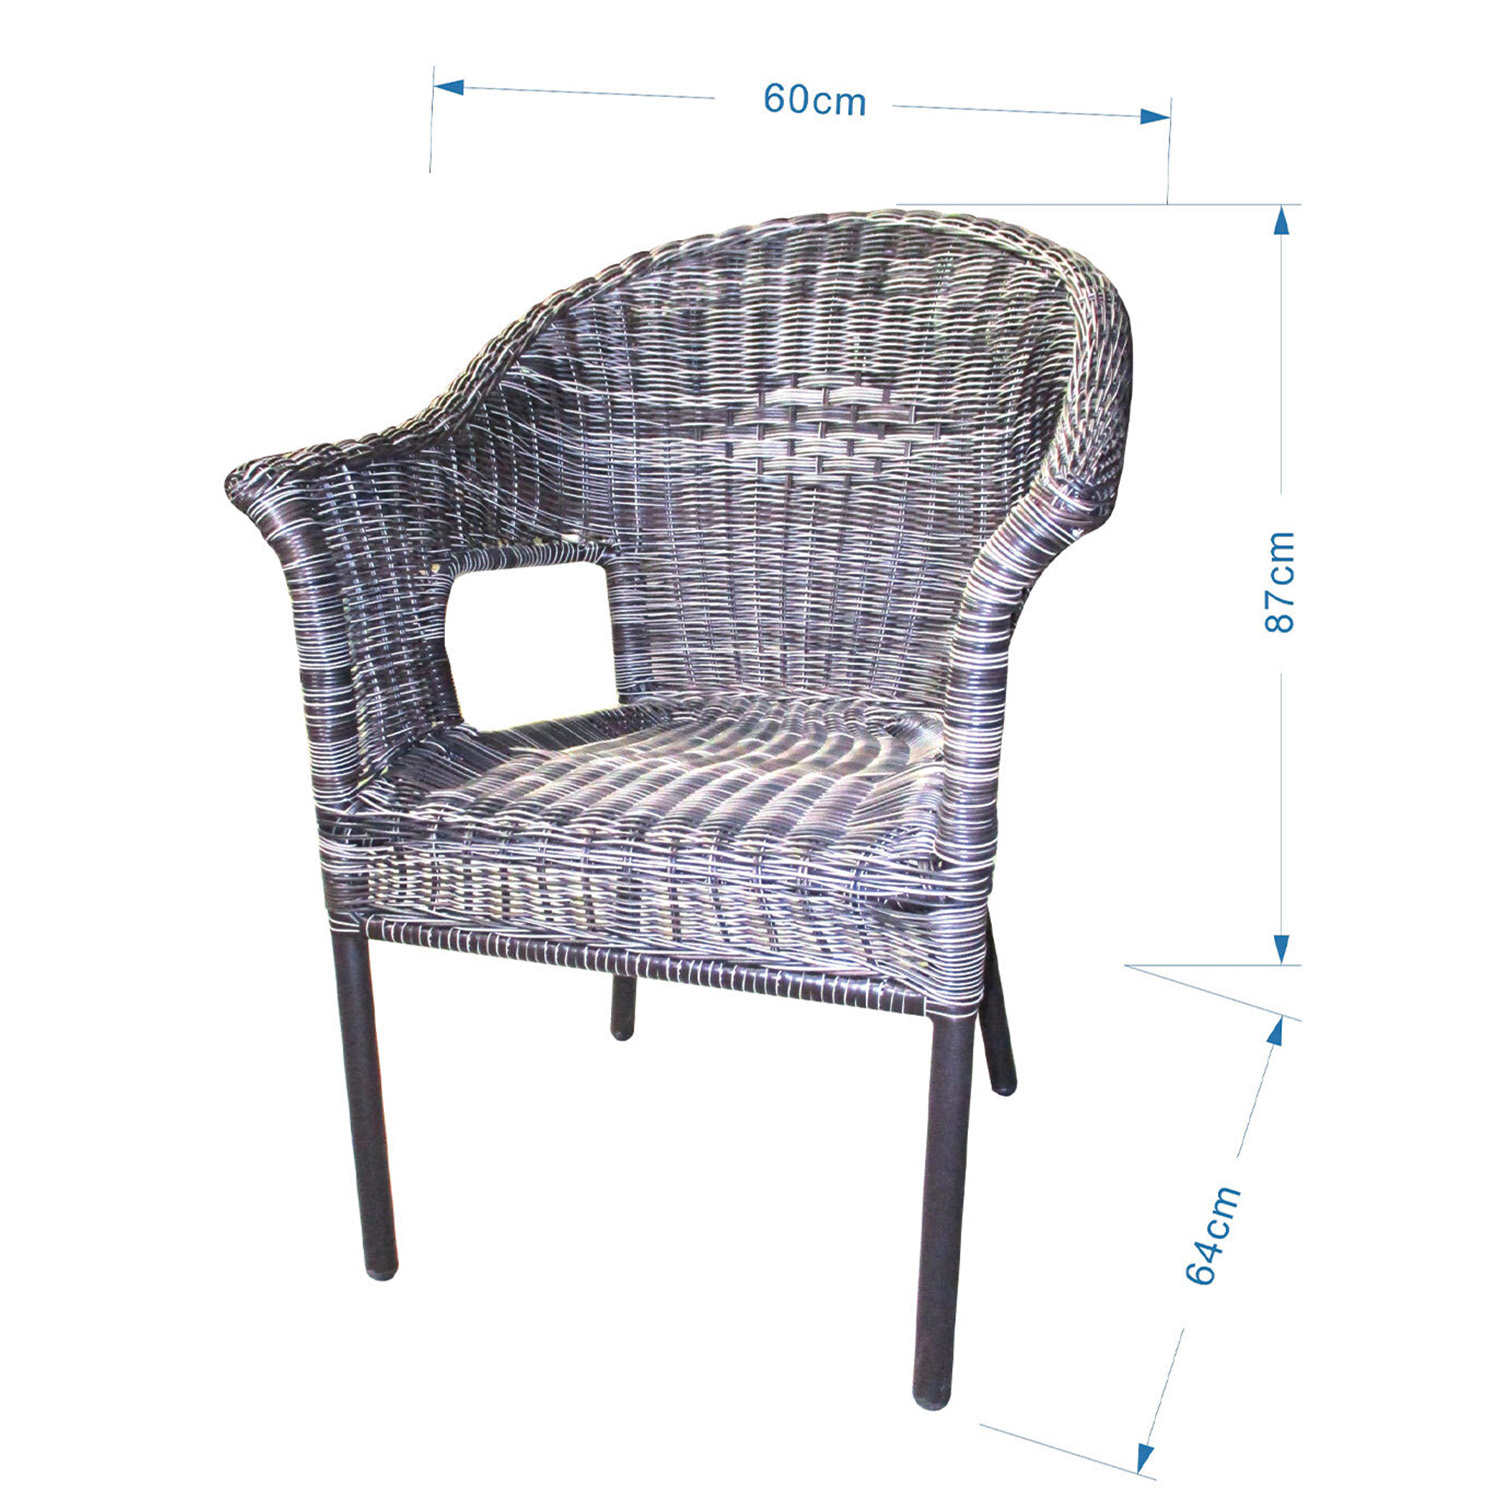 Malay Deluxe Outdoor Essentials Padstow Wicker Chair Image 3